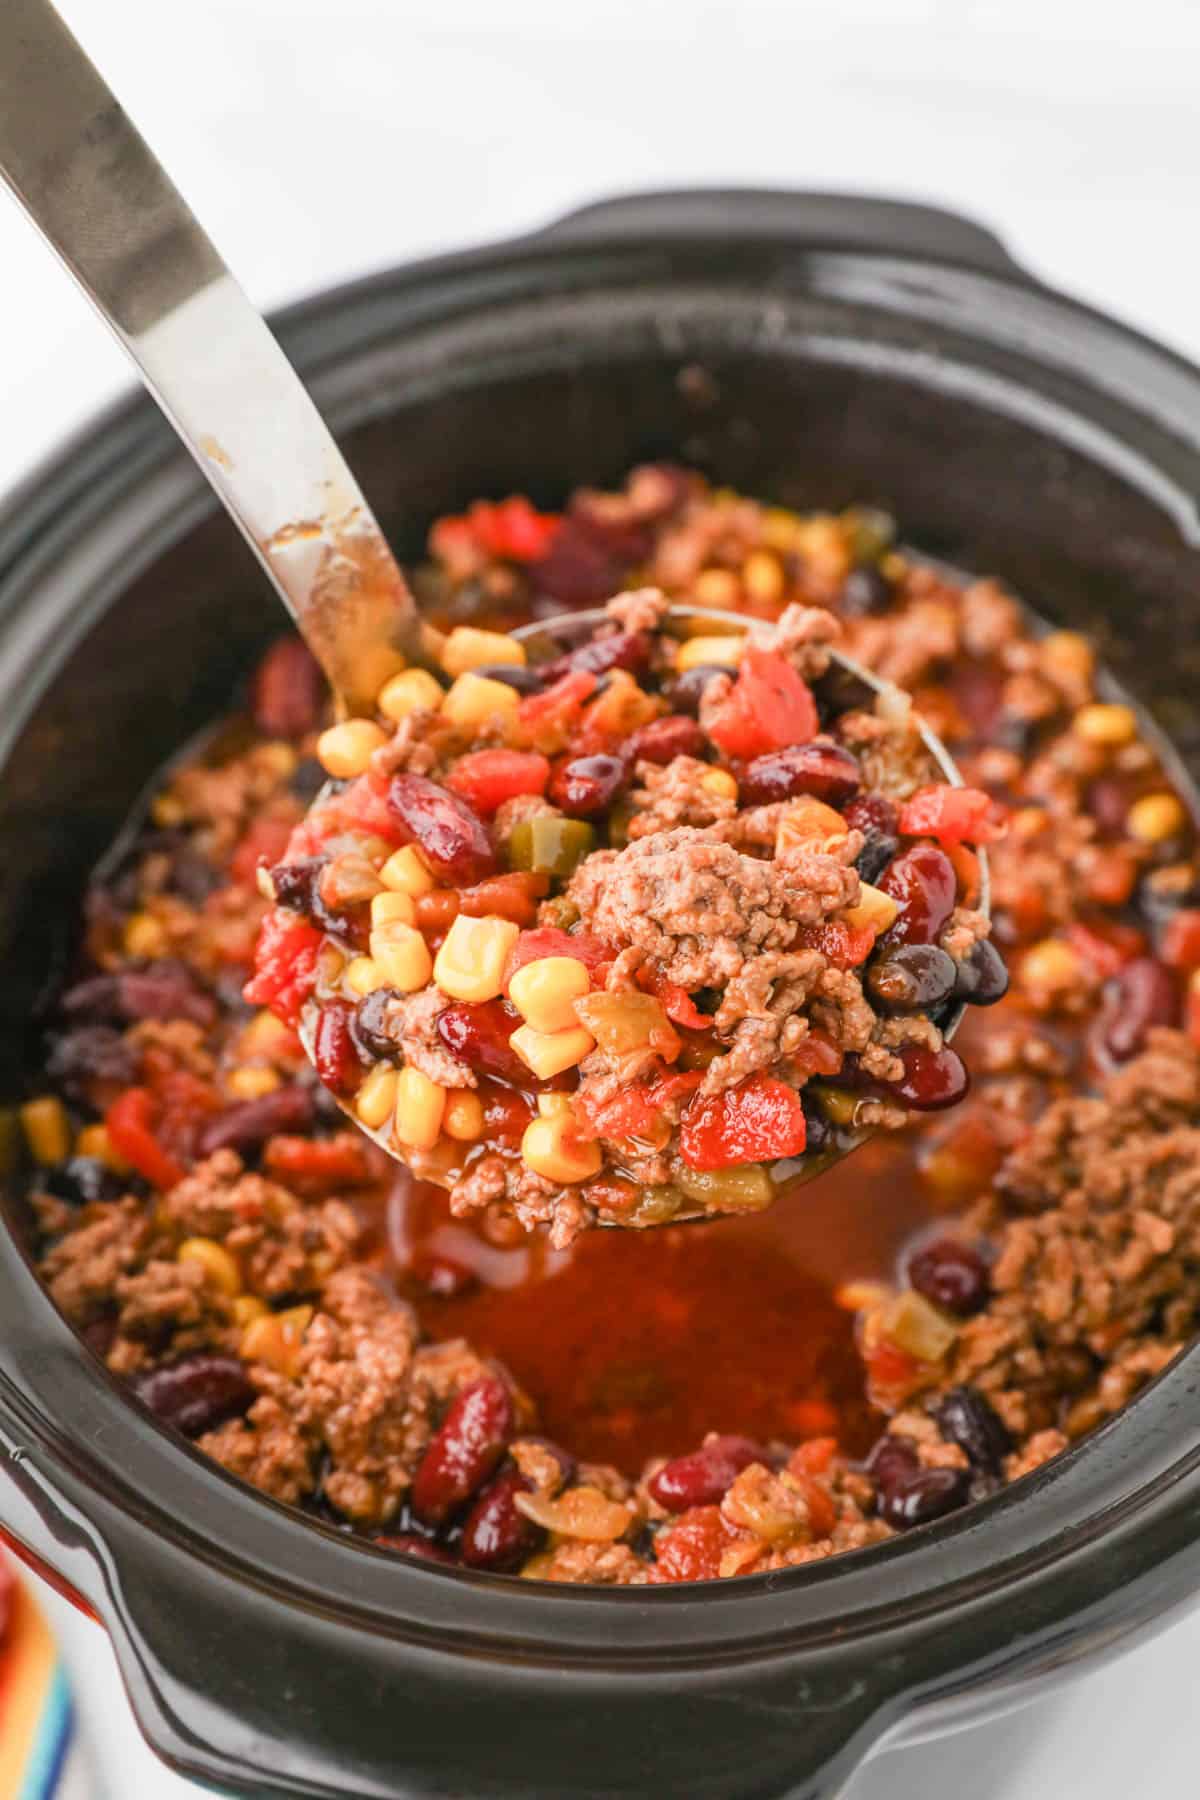 A ladle lifting a scoop of taco soup from a crock pot.